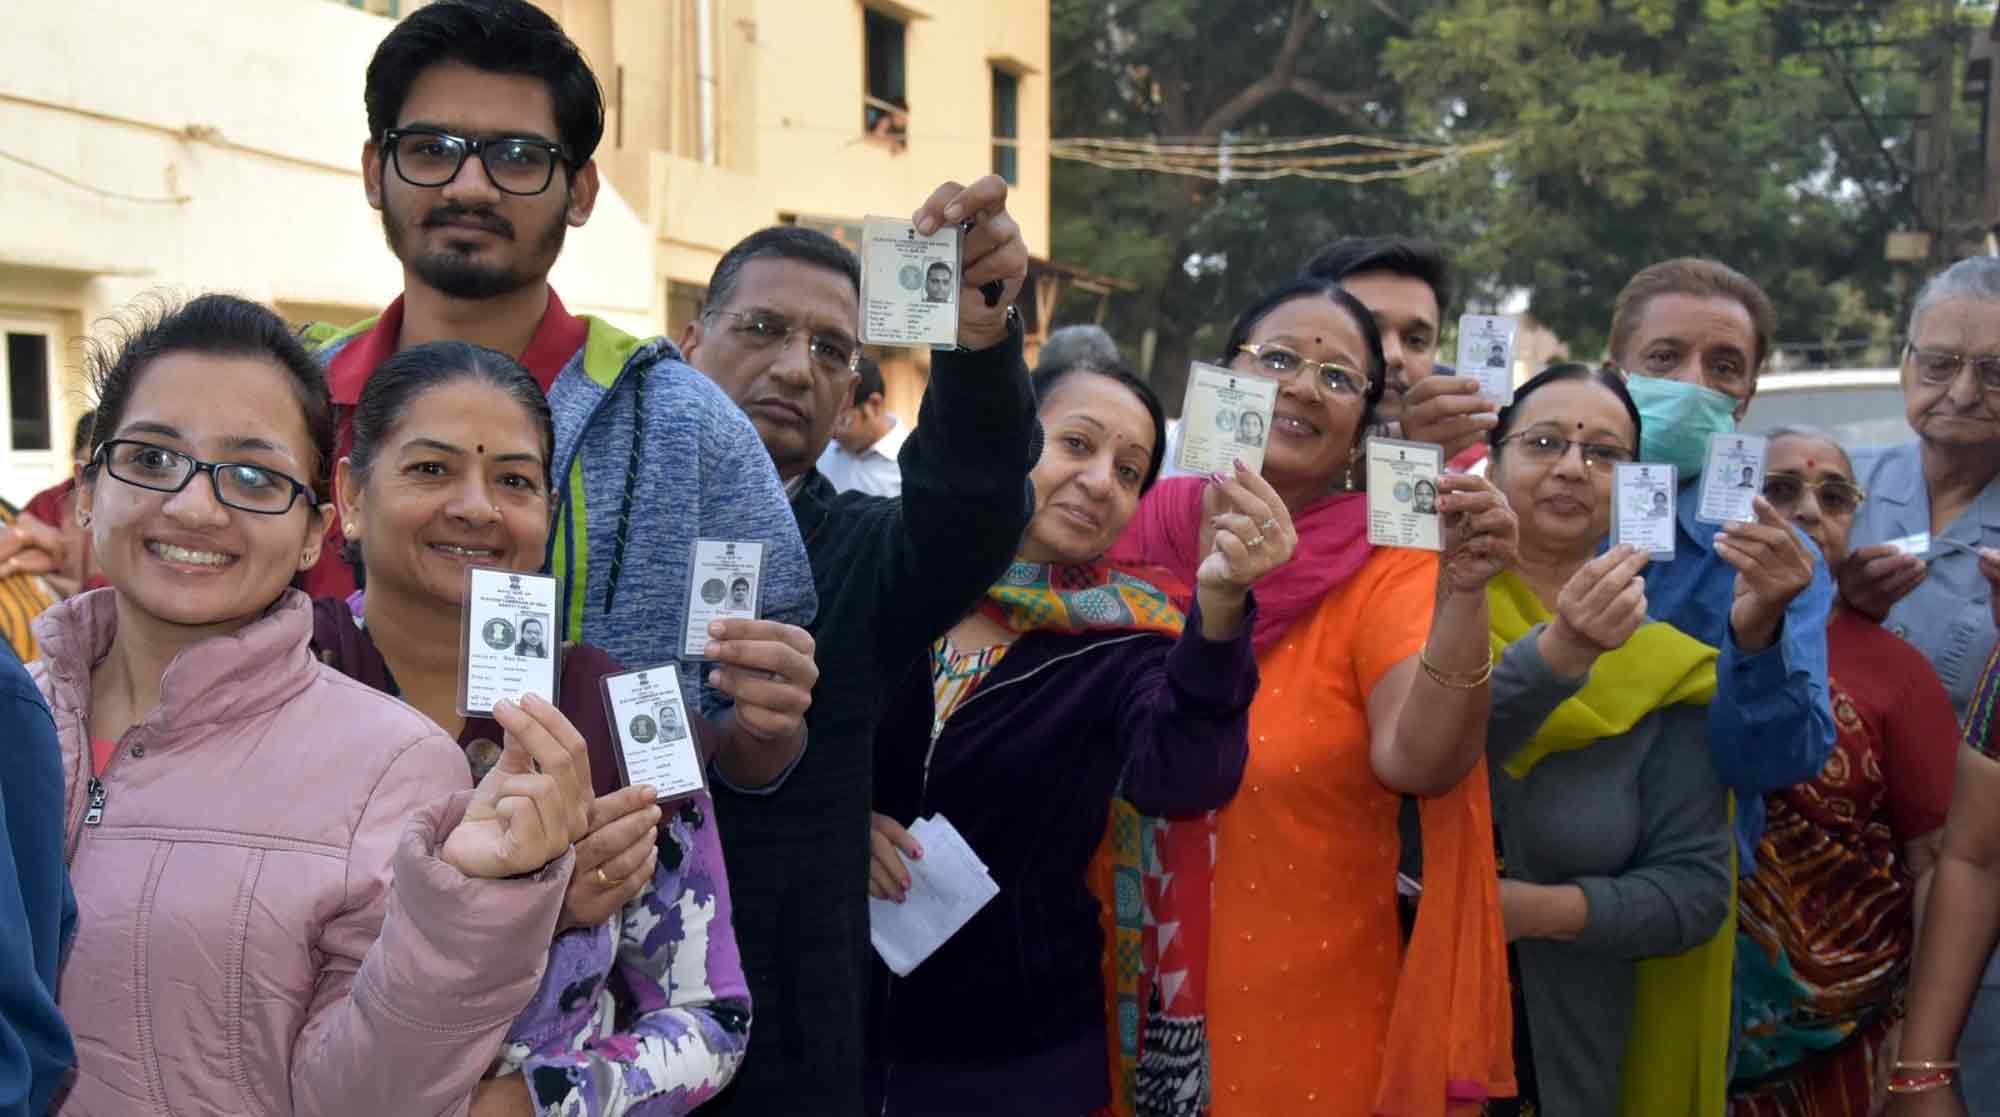 Exit polls done under BJP pressure, totally wrong: Congress